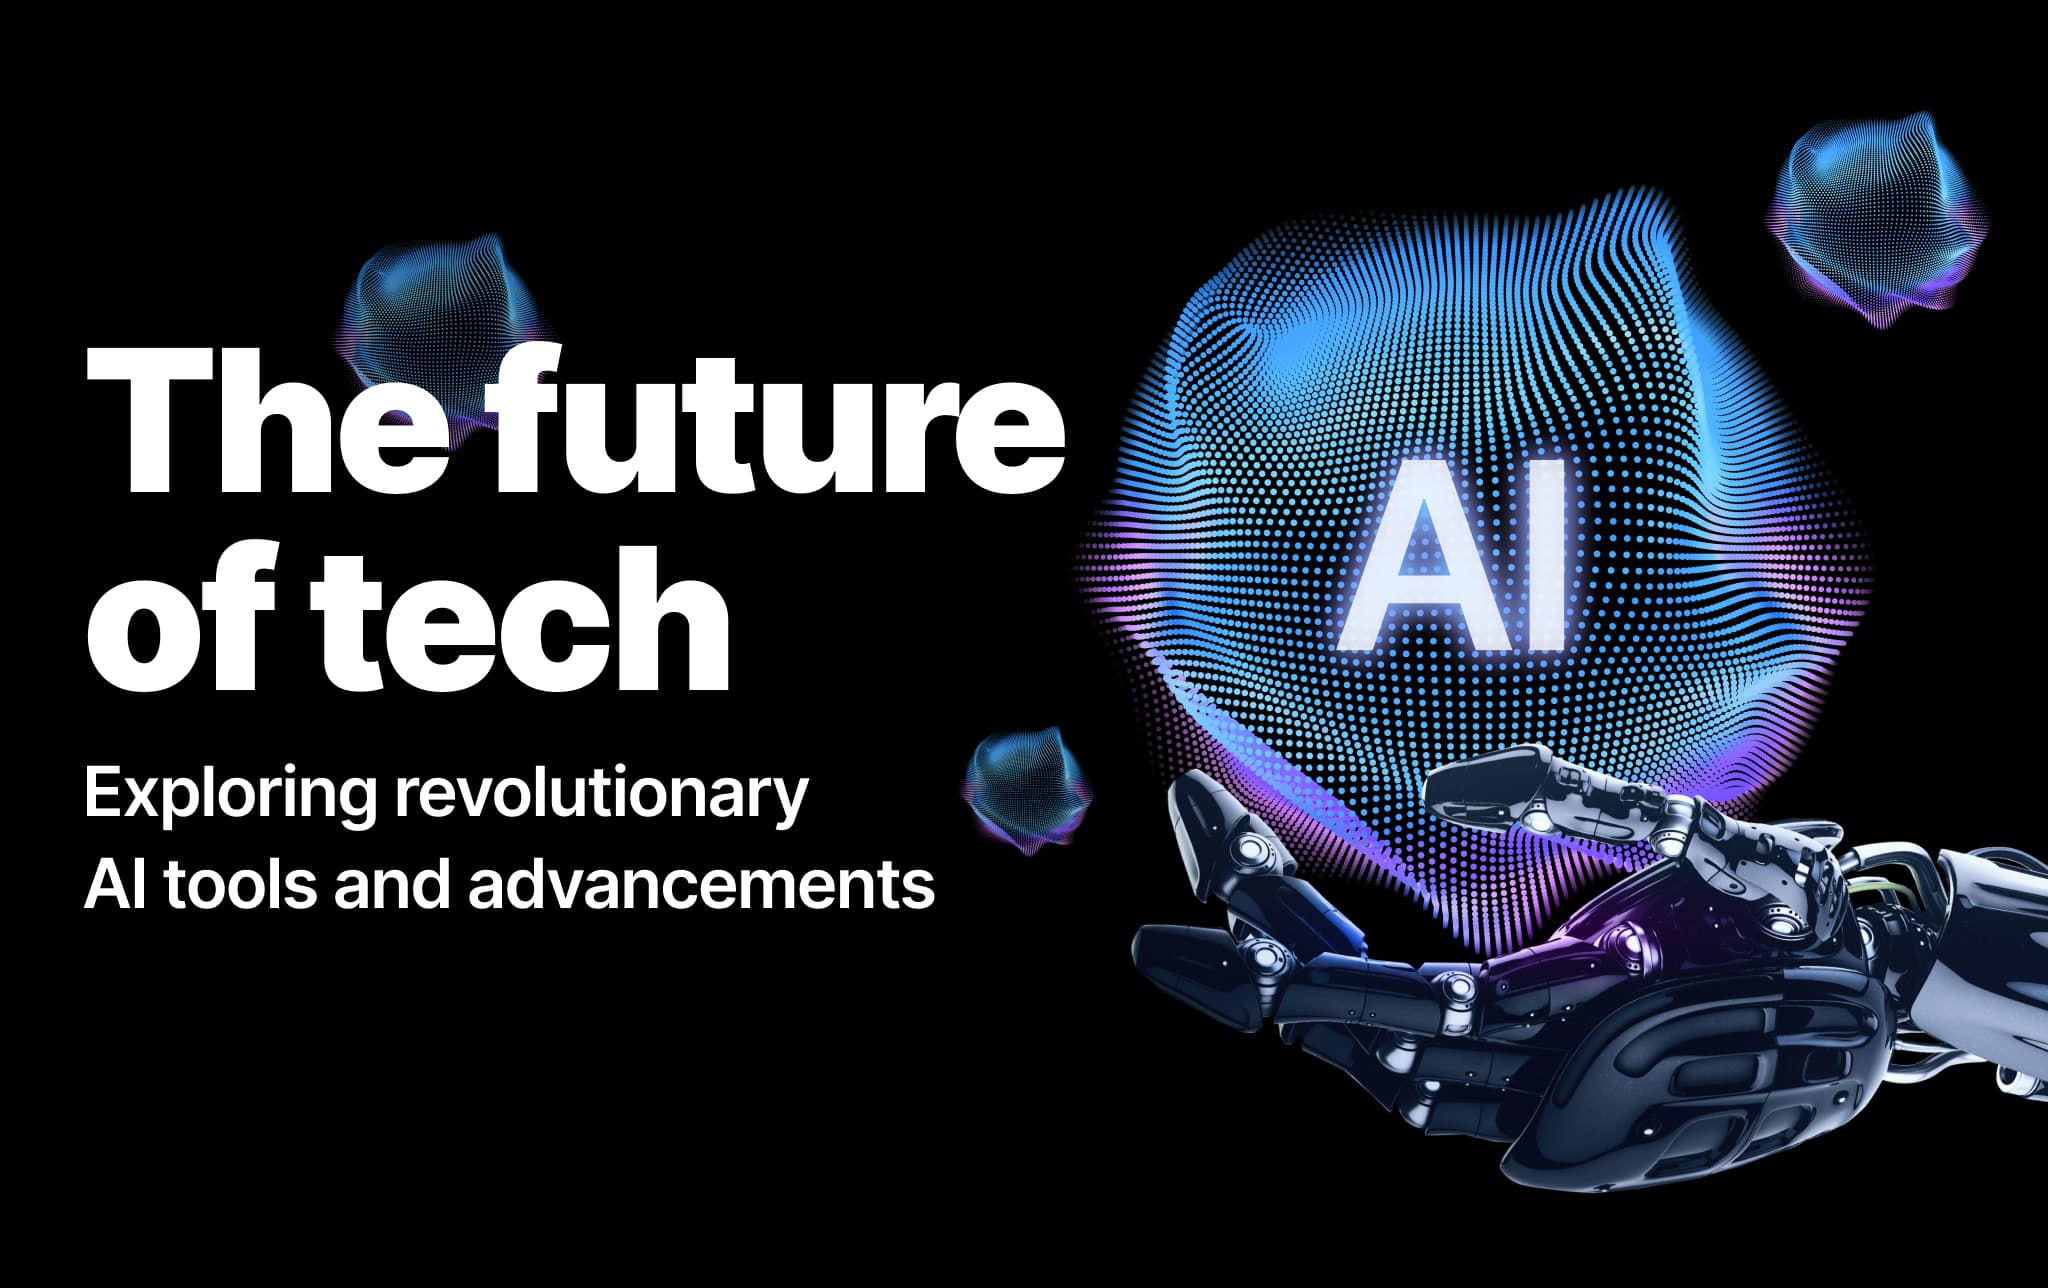 The future of tech: exploring revolutionary AI tools and advancements